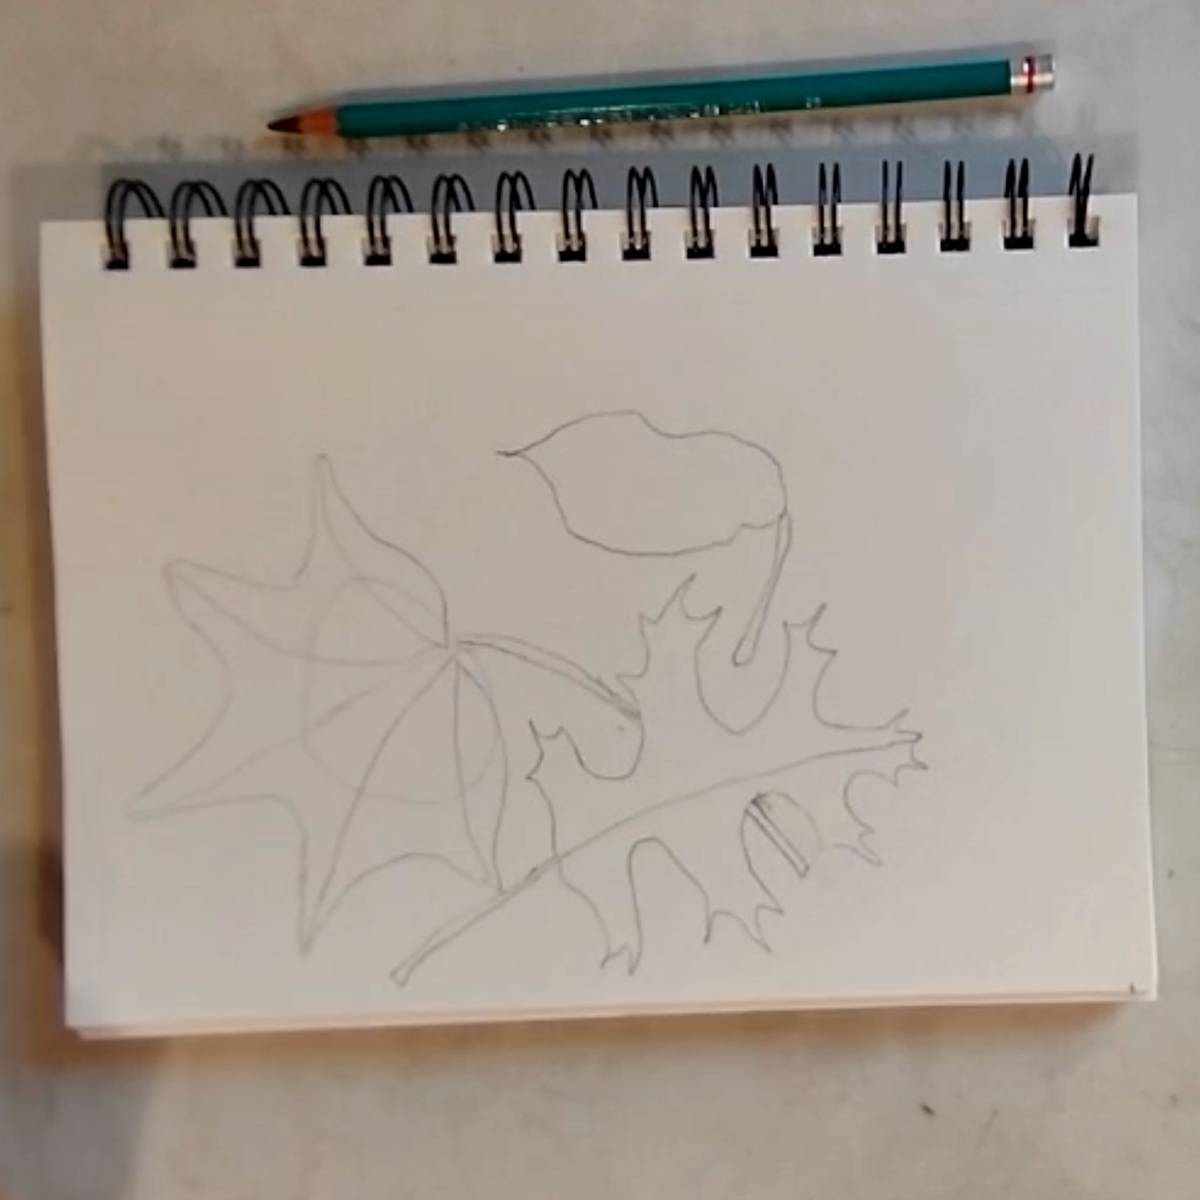 Outline sketch in pencil of fall leaves on a spiral sketchpad. 